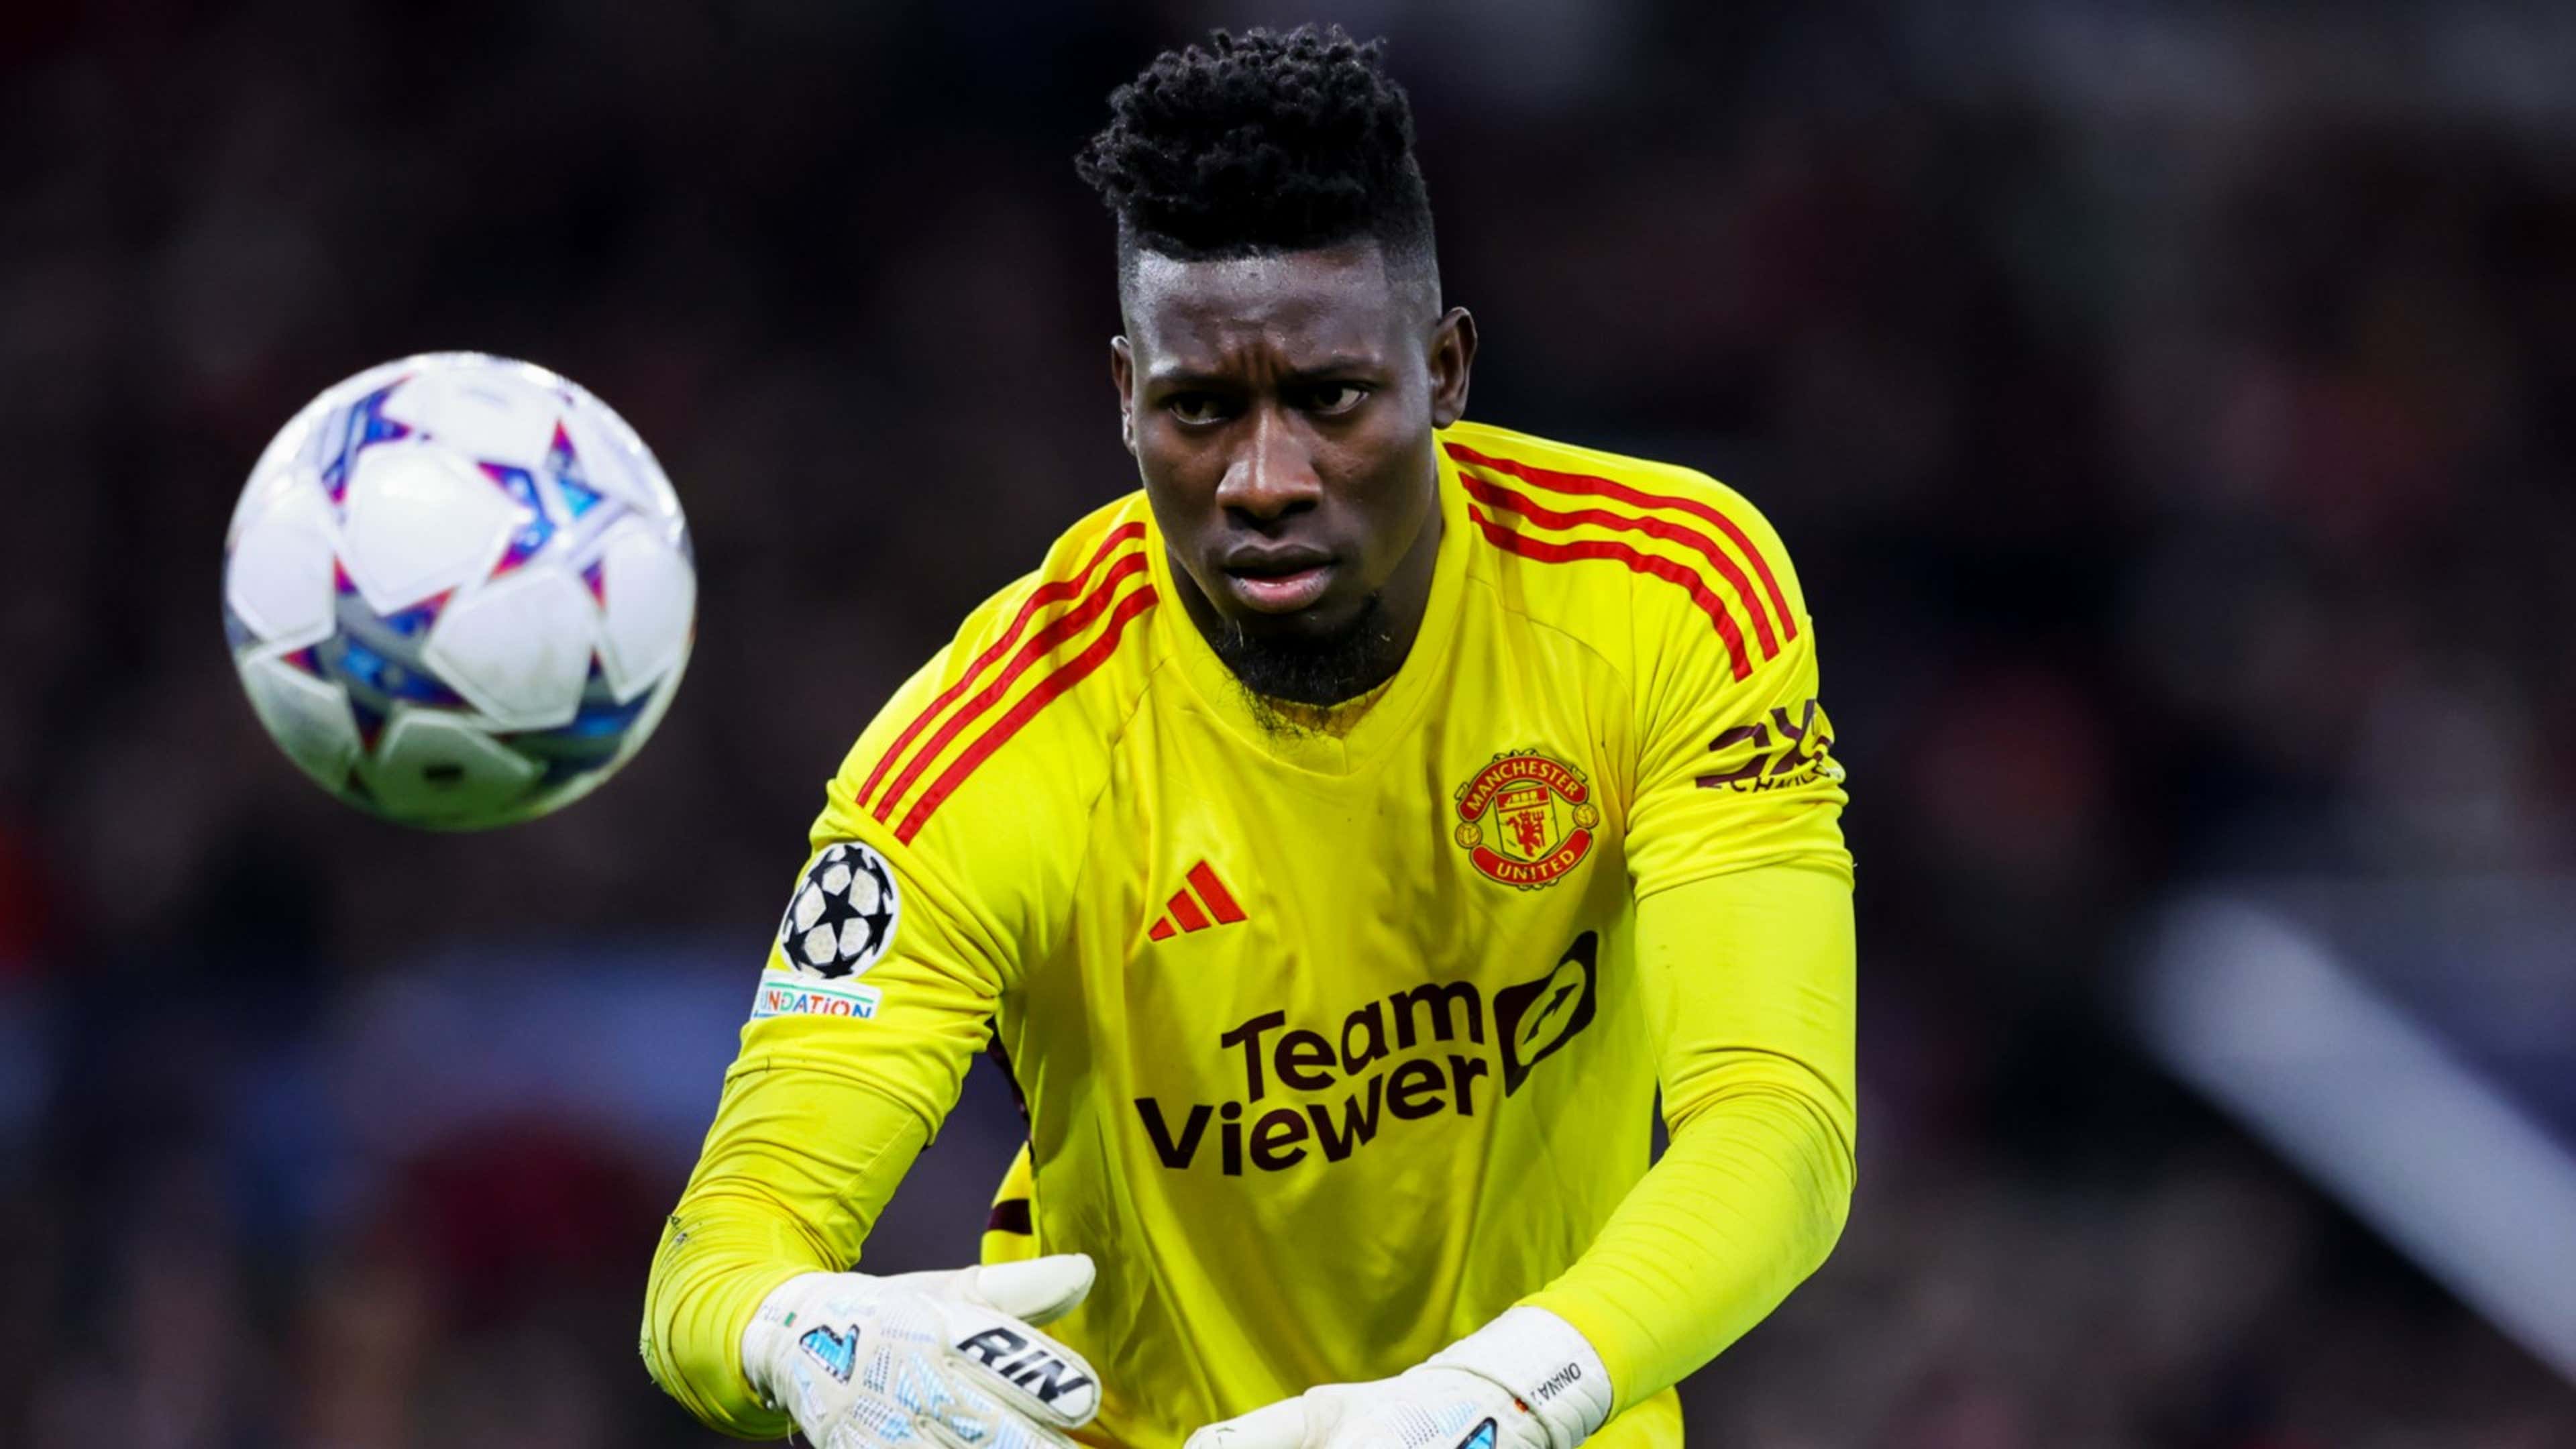 The Andre Onana problem: Man Utd were right to axe David de Gea - but  ex-Inter goalkeeper is clearly not an upgrade | Goal.com UK